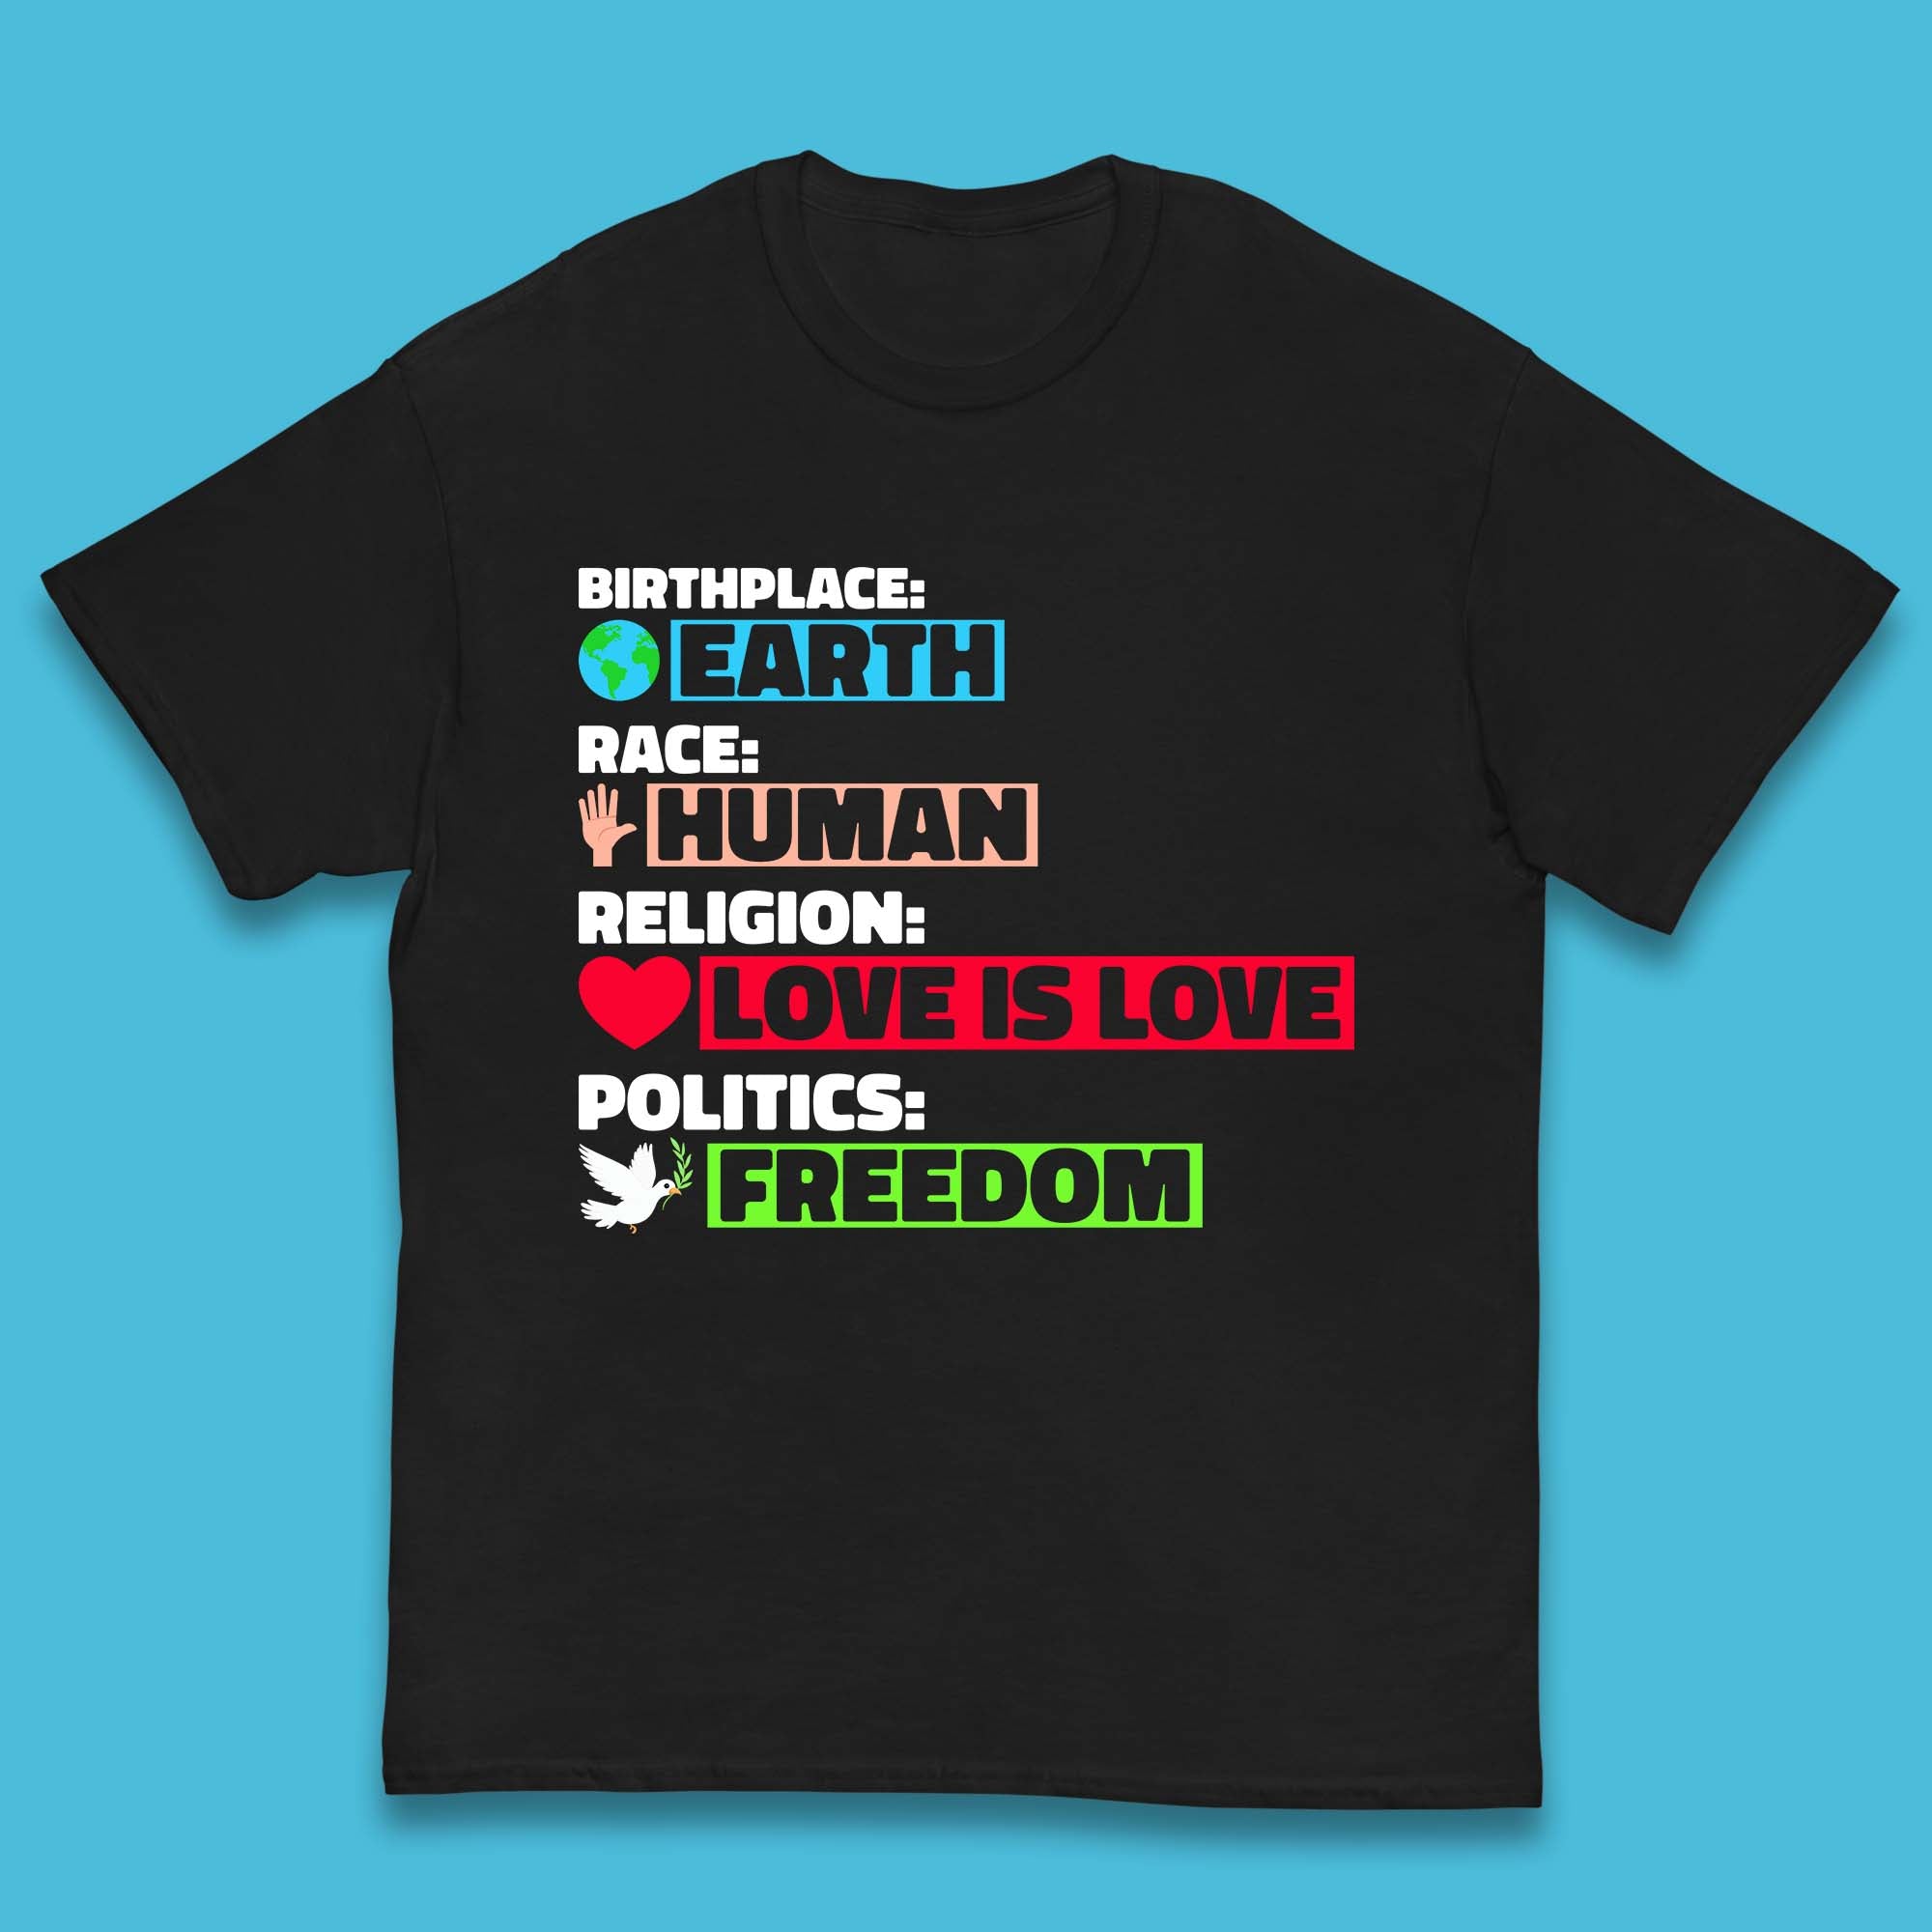 Birth Place Earth Race Human Politics Freedom Religion Love Humanist Human Rights Equality Kids T Shirt